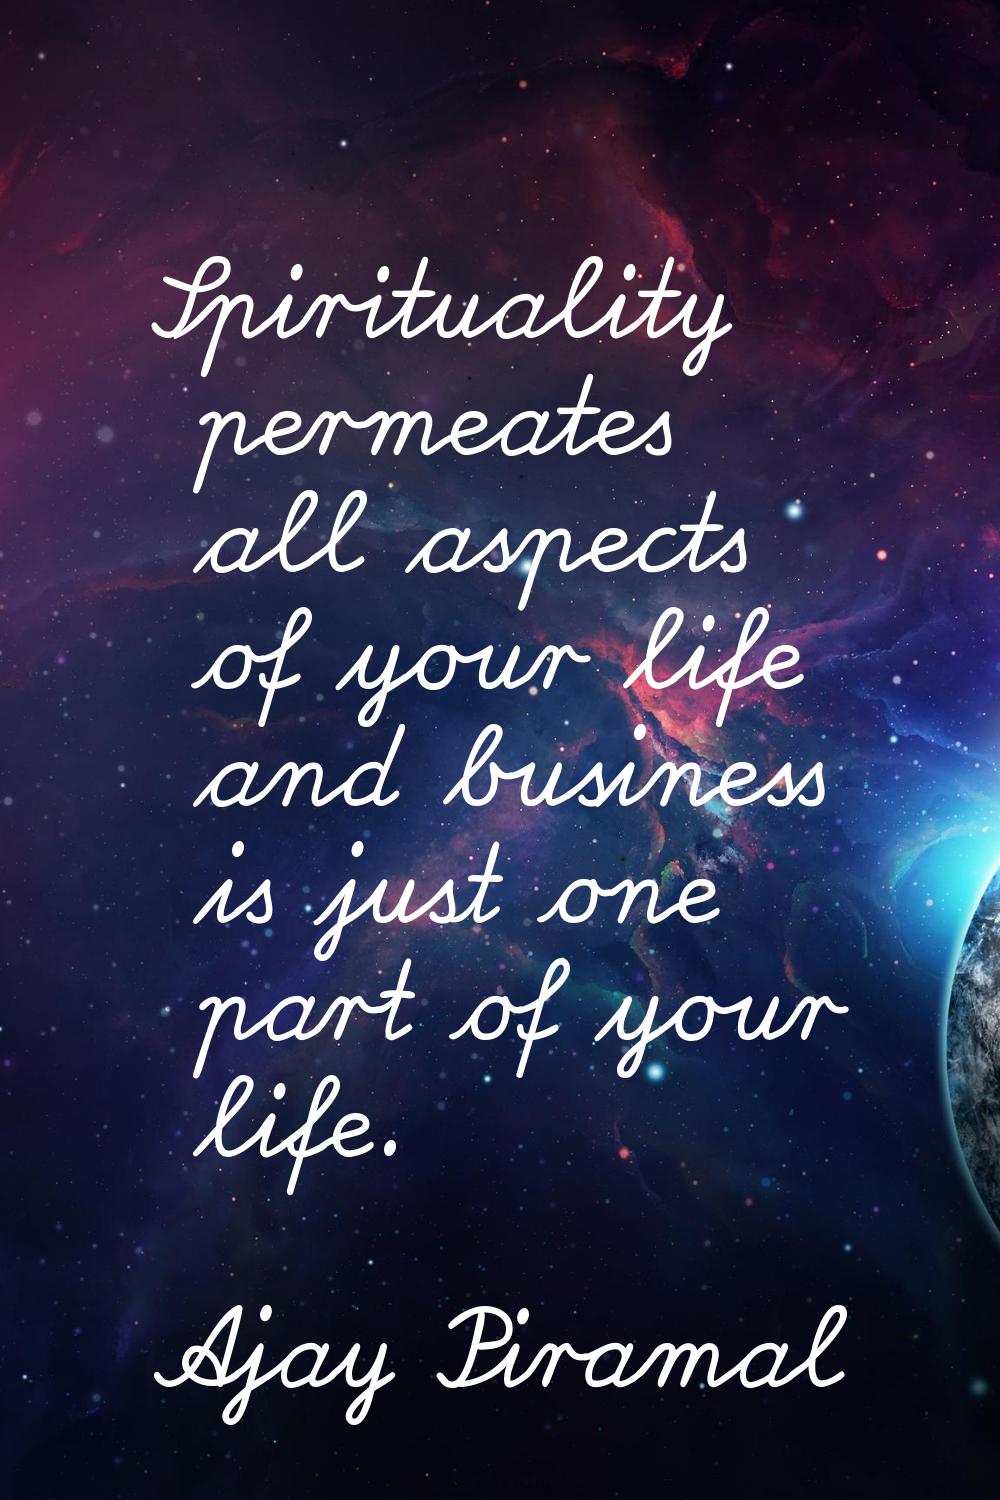 Spirituality permeates all aspects of your life and business is just one part of your life.